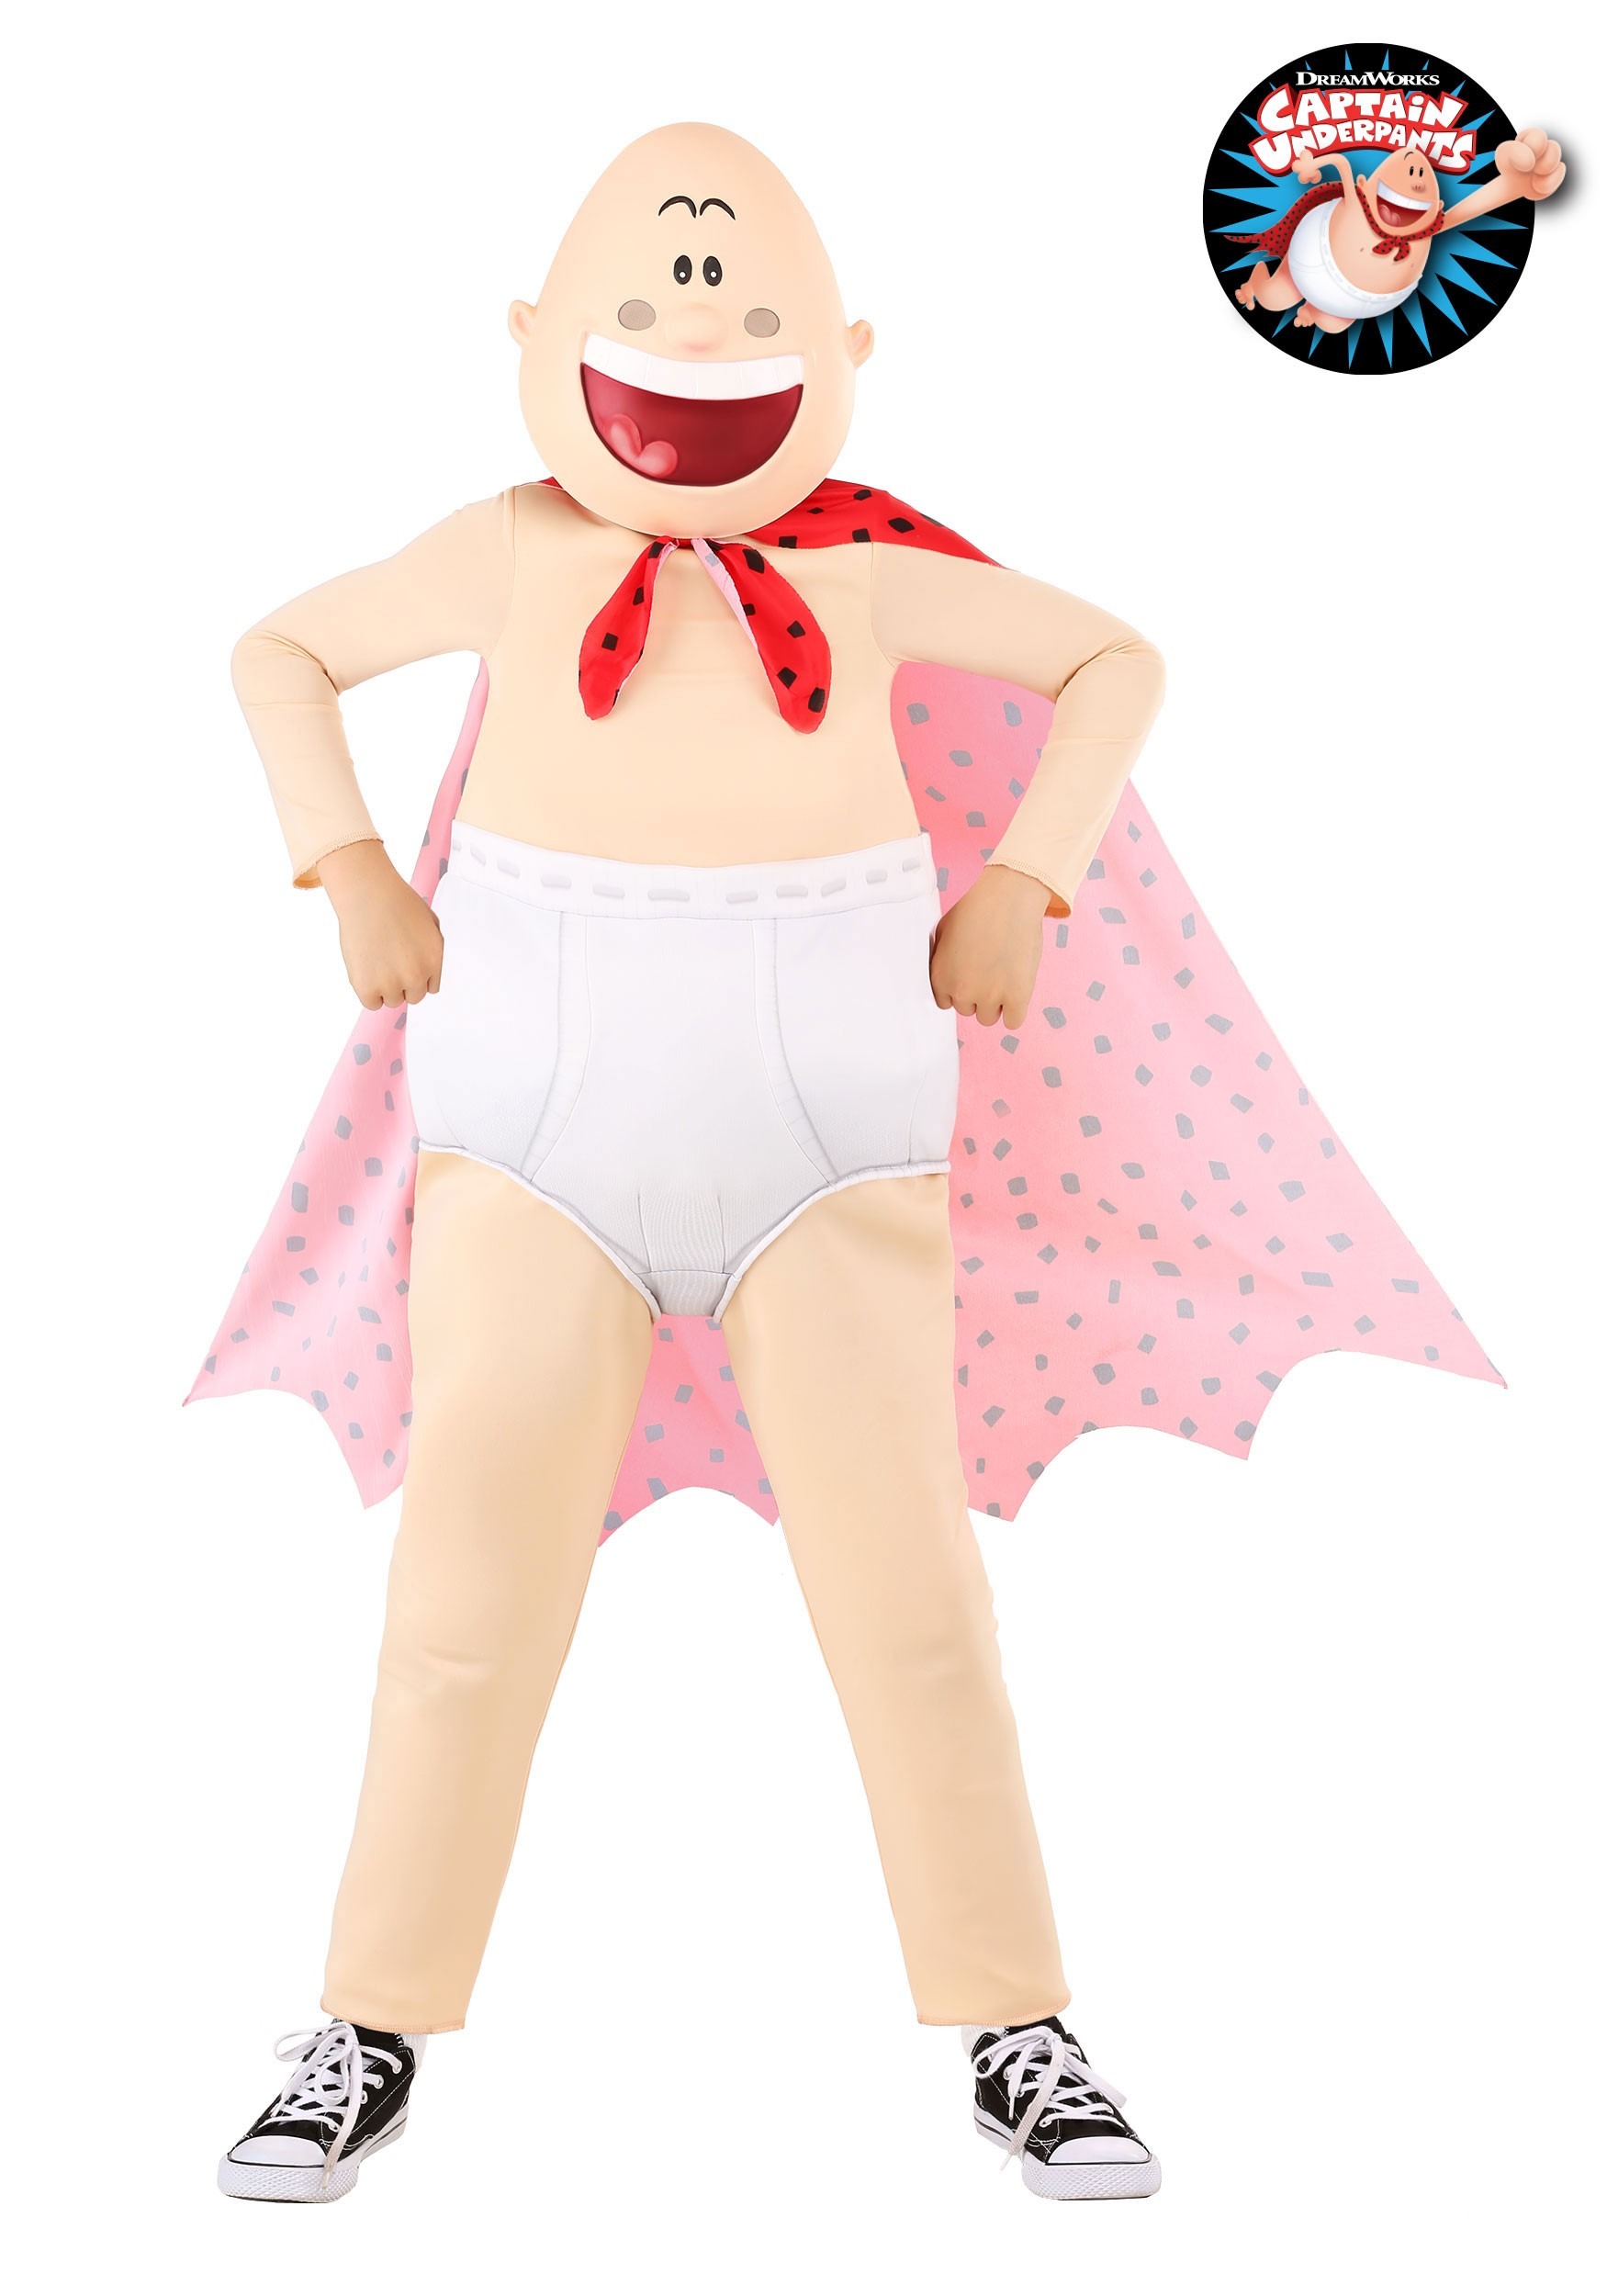 https://images.halloweencostumes.ca/products/69108/1-1/captain-underpants-child-costume.jpg